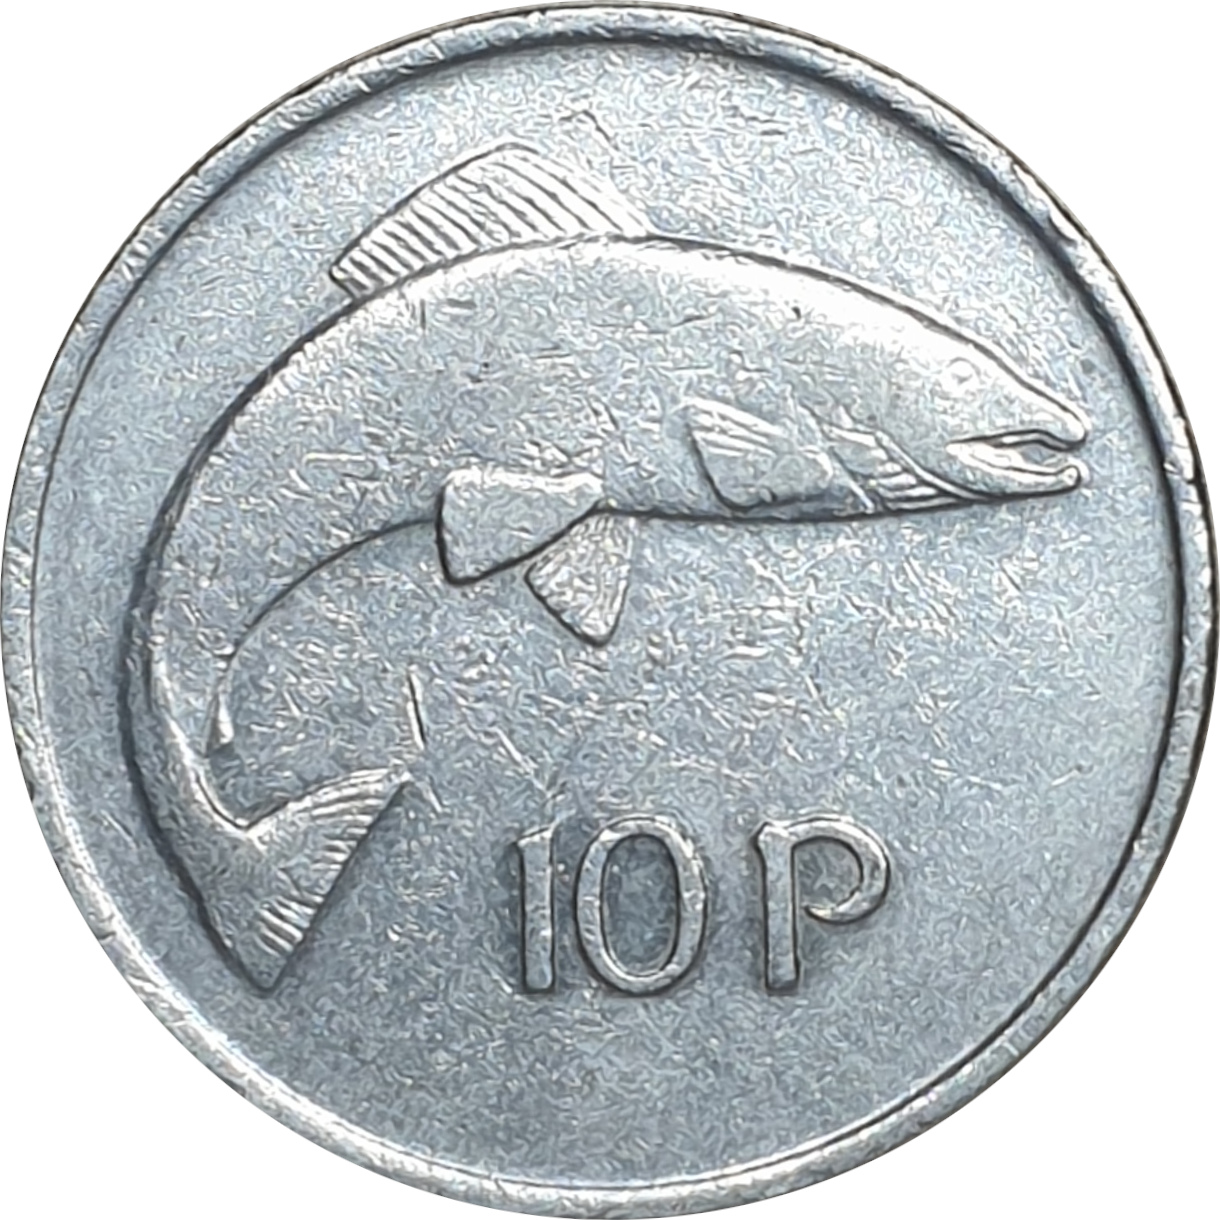 10 pence - EIRE - Type lourd